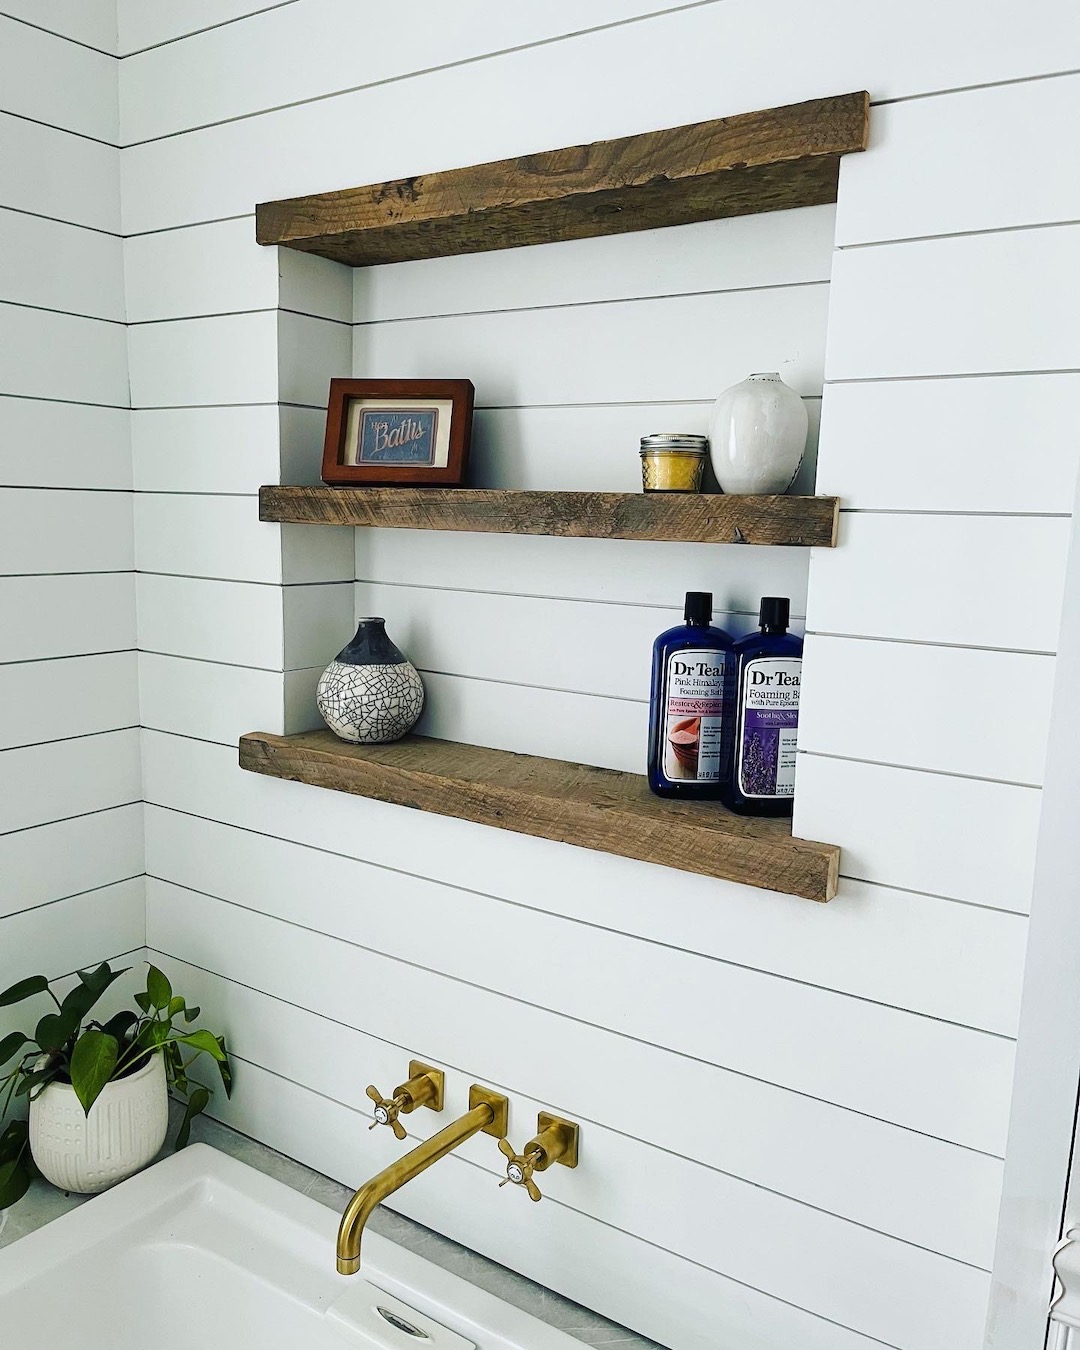 How to build wall shelves